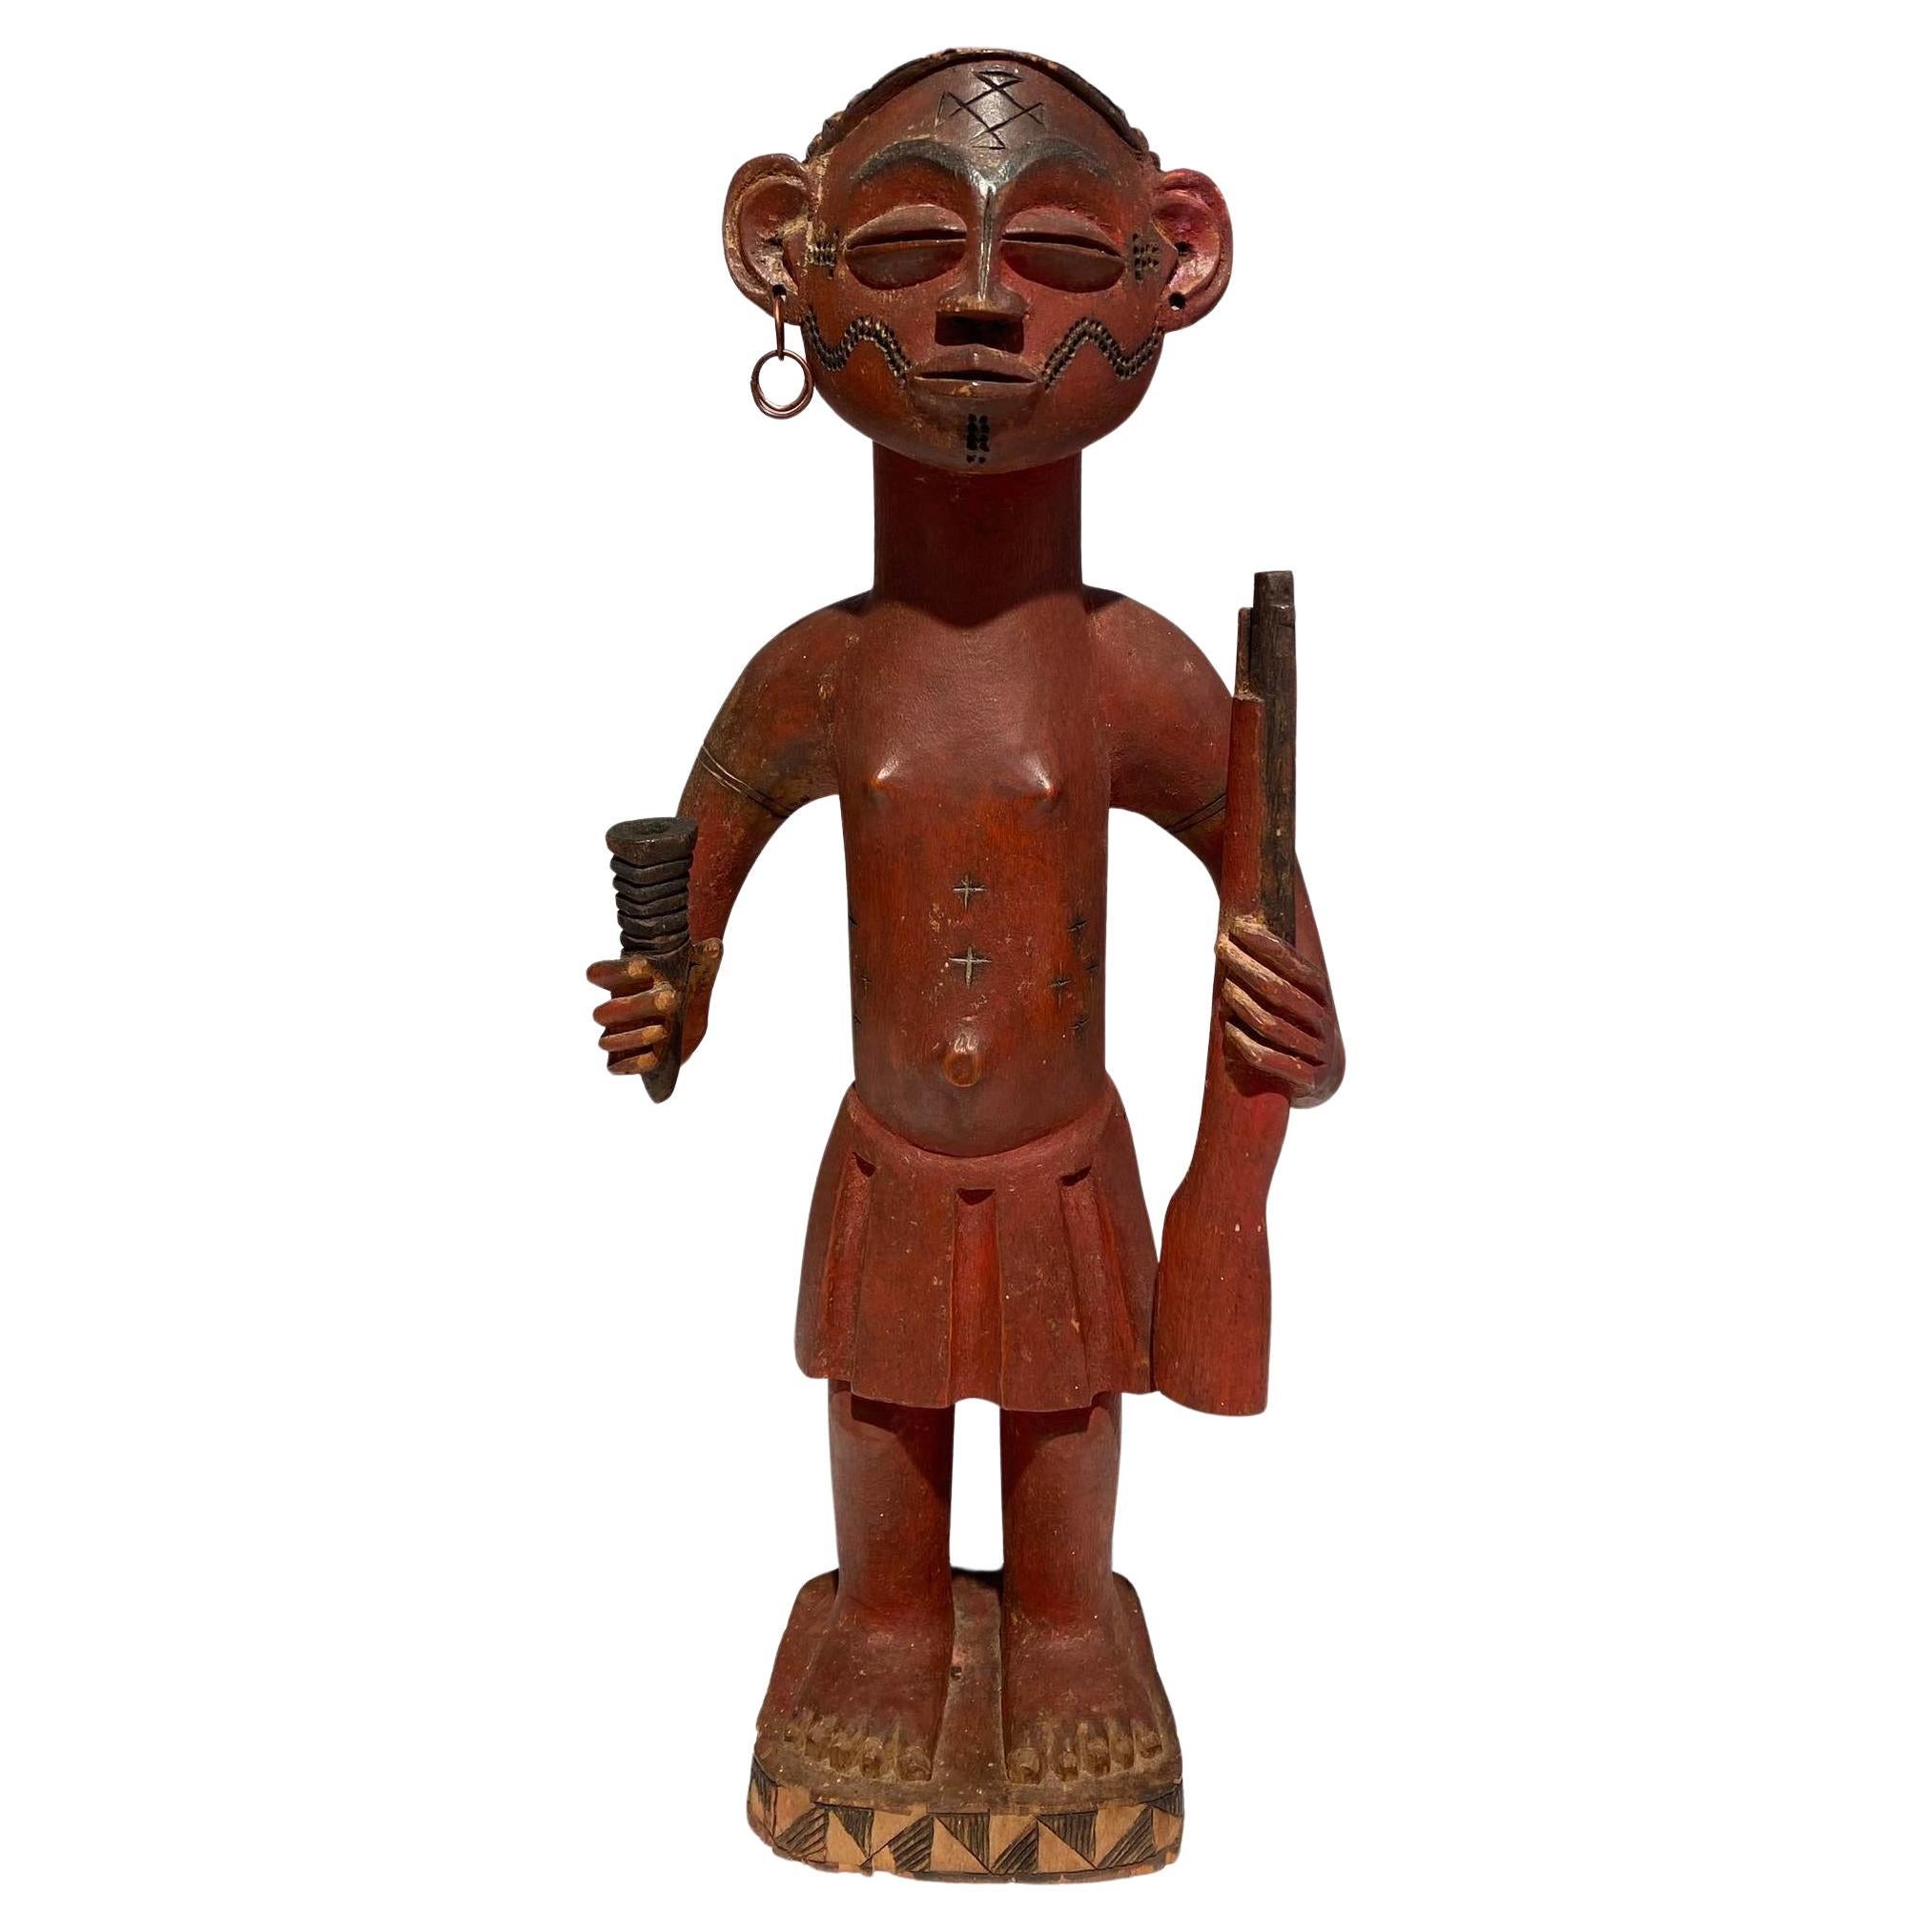 Statue Of The Tshokwe / Chokwe Tribe -Dr Congo African Art Angola - Early 20th C